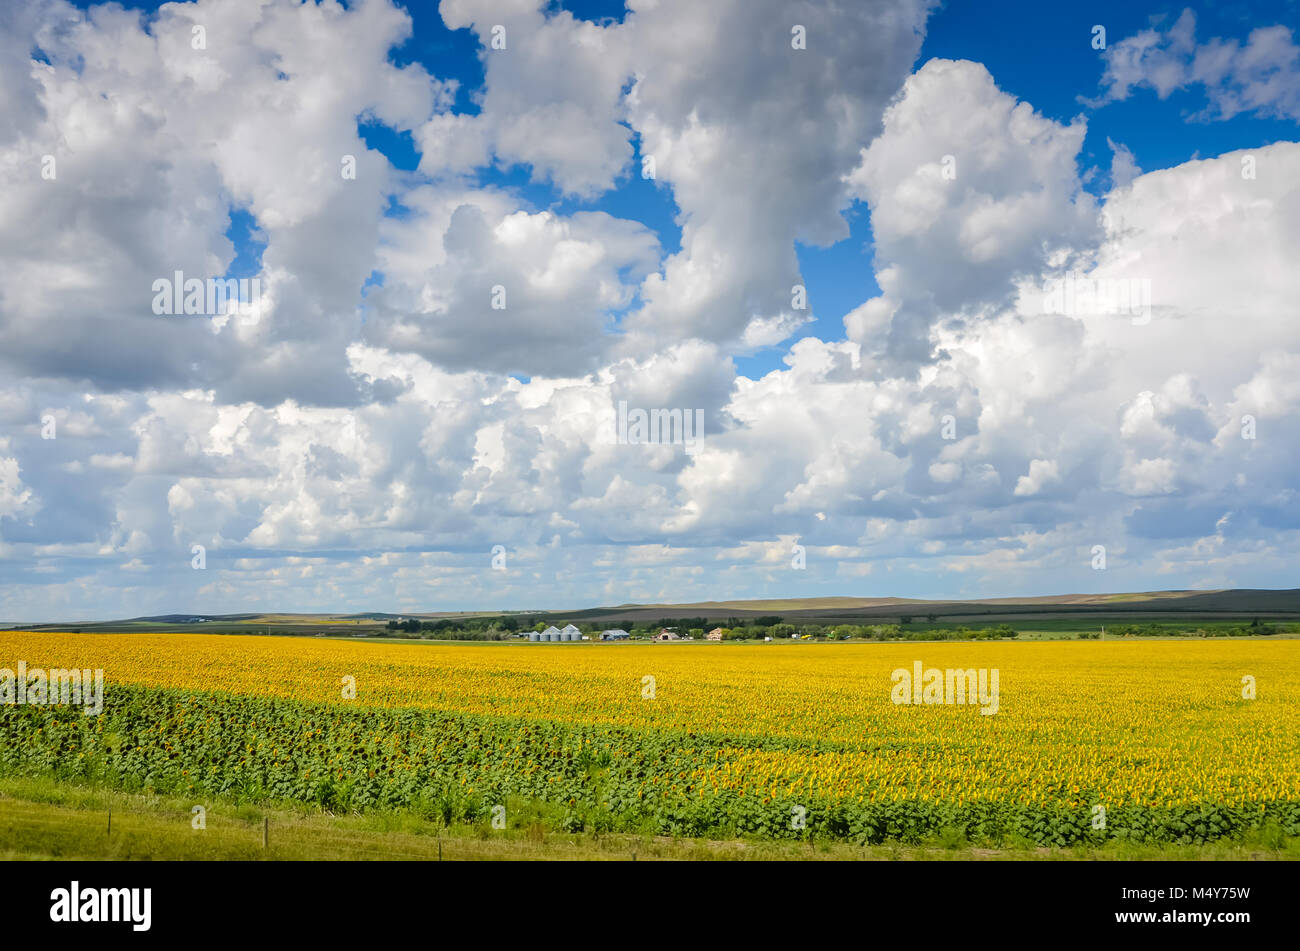 Field of sunflowers under a wide open bright blue sky filled with puffy white clouds on a roadside of South Dakota. Stock Photo